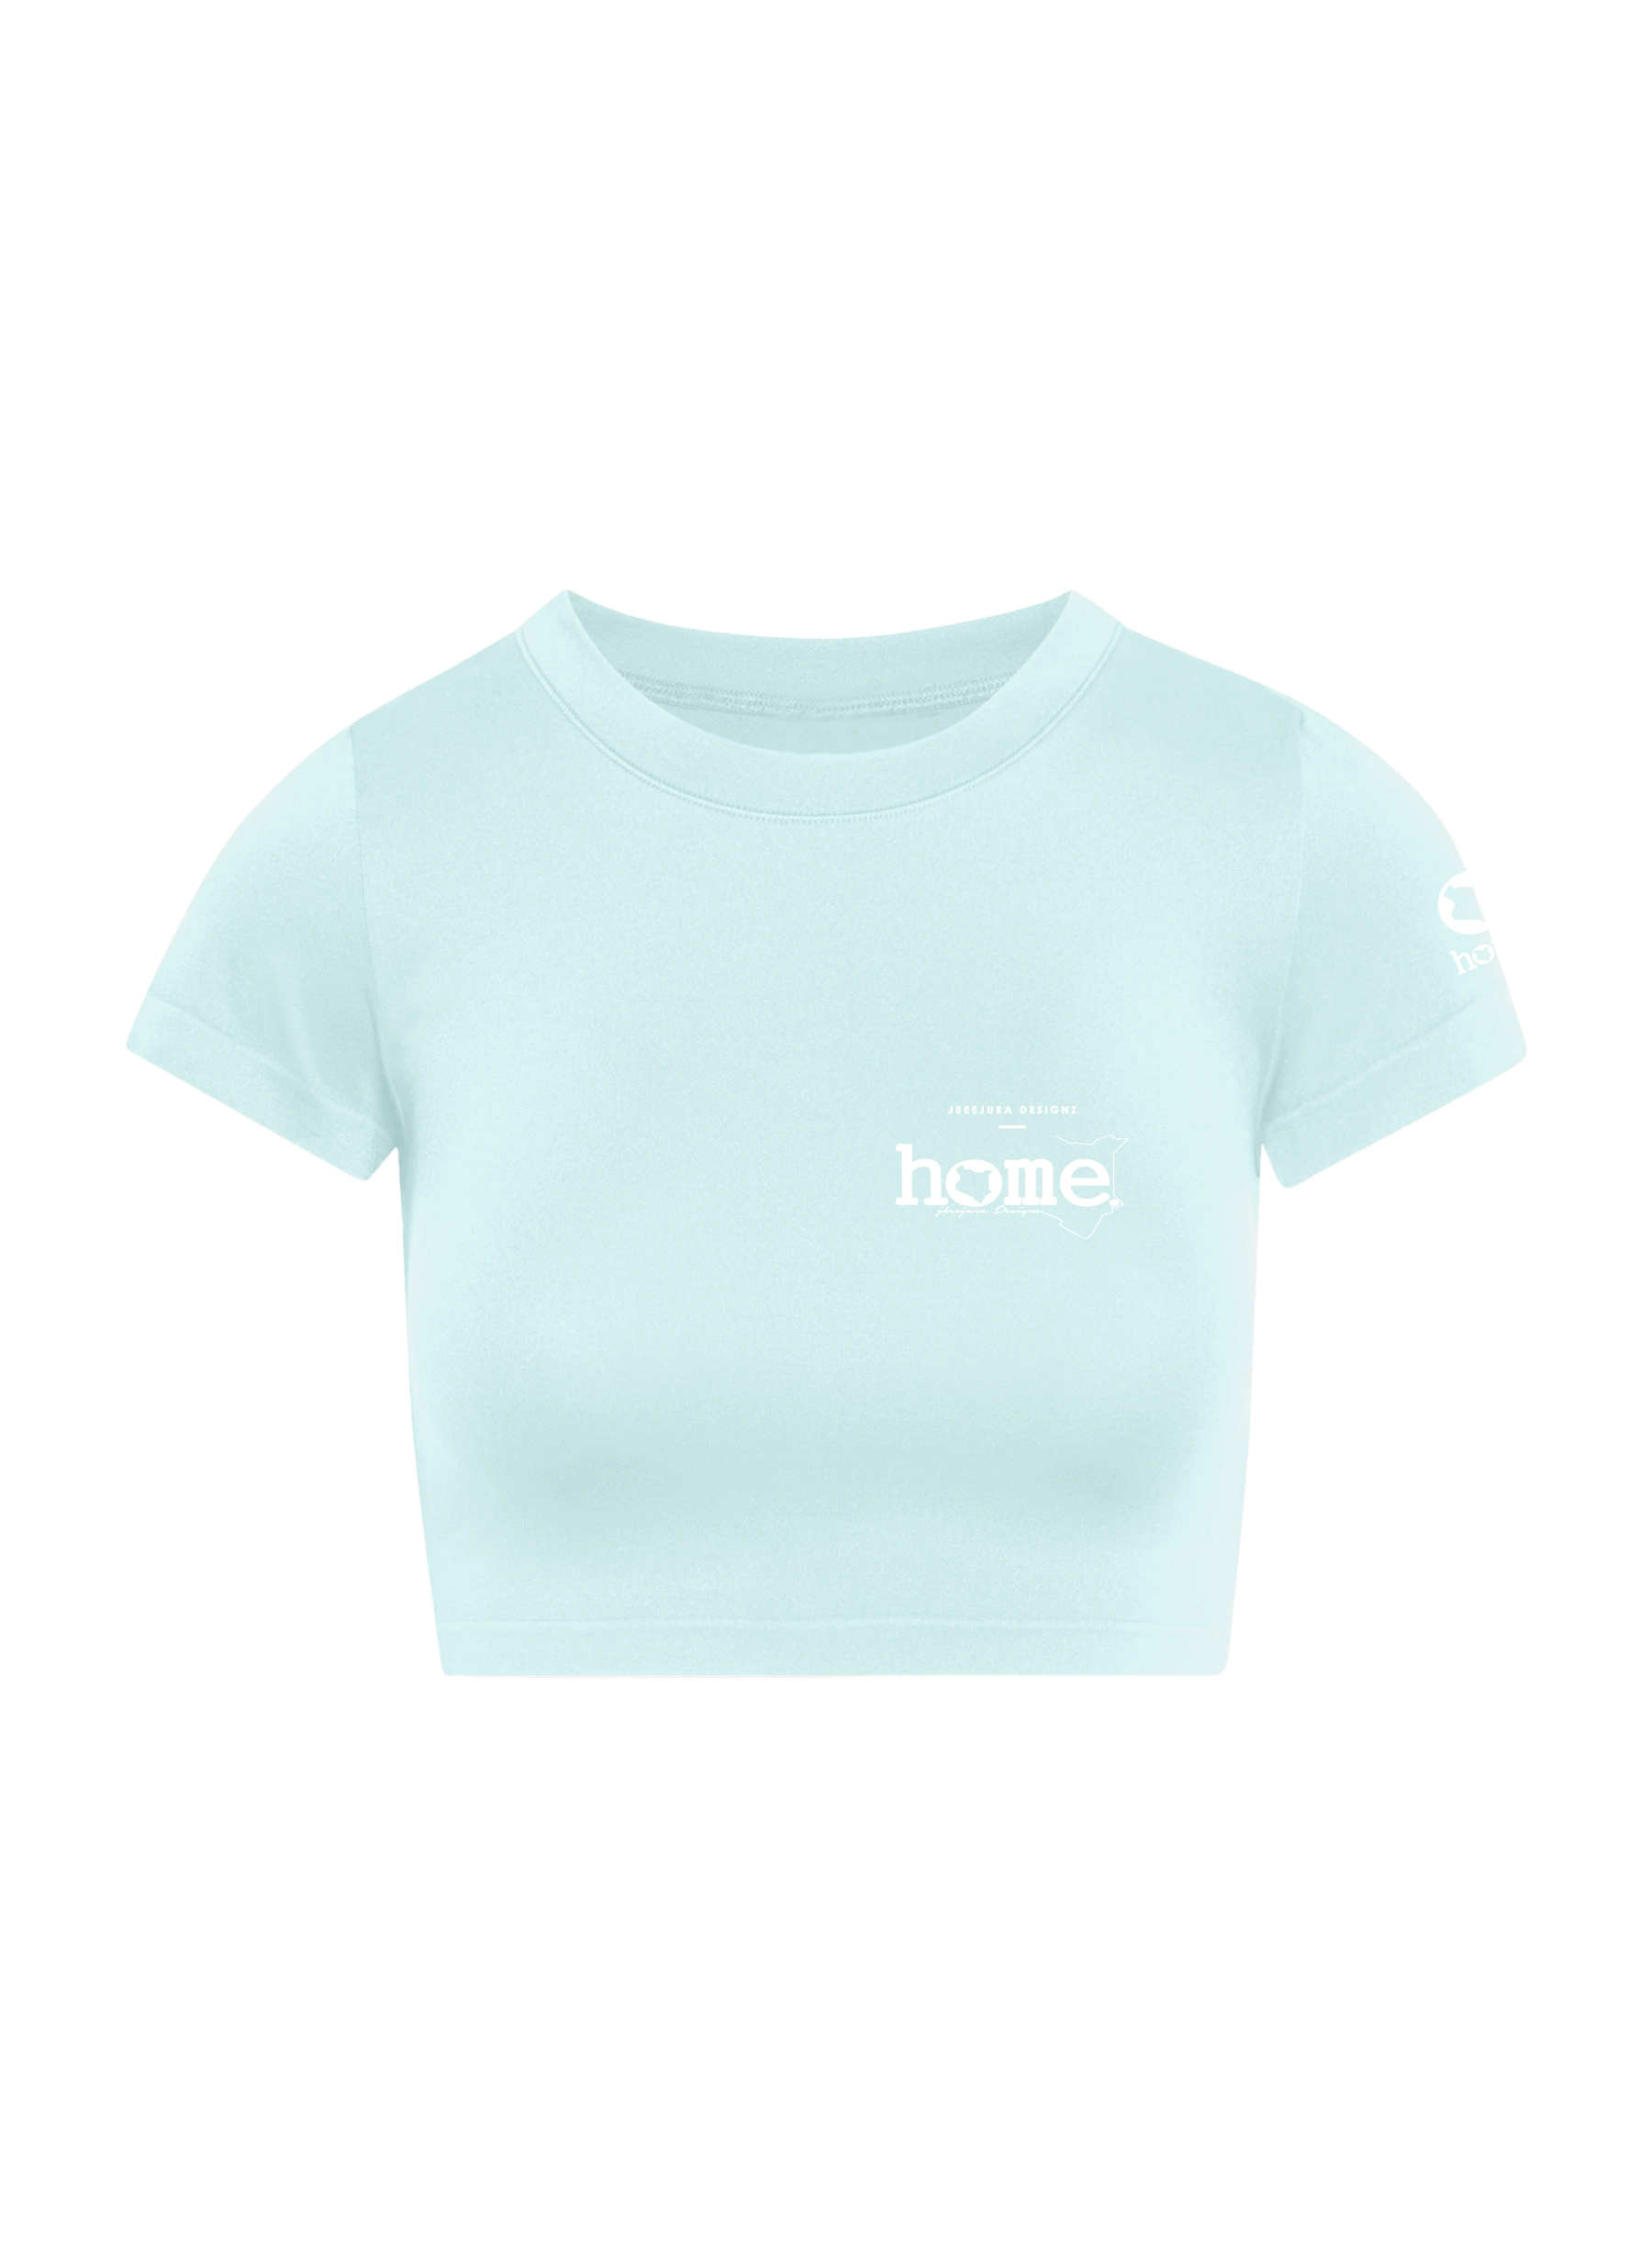 home_254 SHORT SLEEVED MISTY BLUE CROPPED ARIA TEE WITH A WHITE 3D WORDS PRINT – COTTON PLUS FABRIC